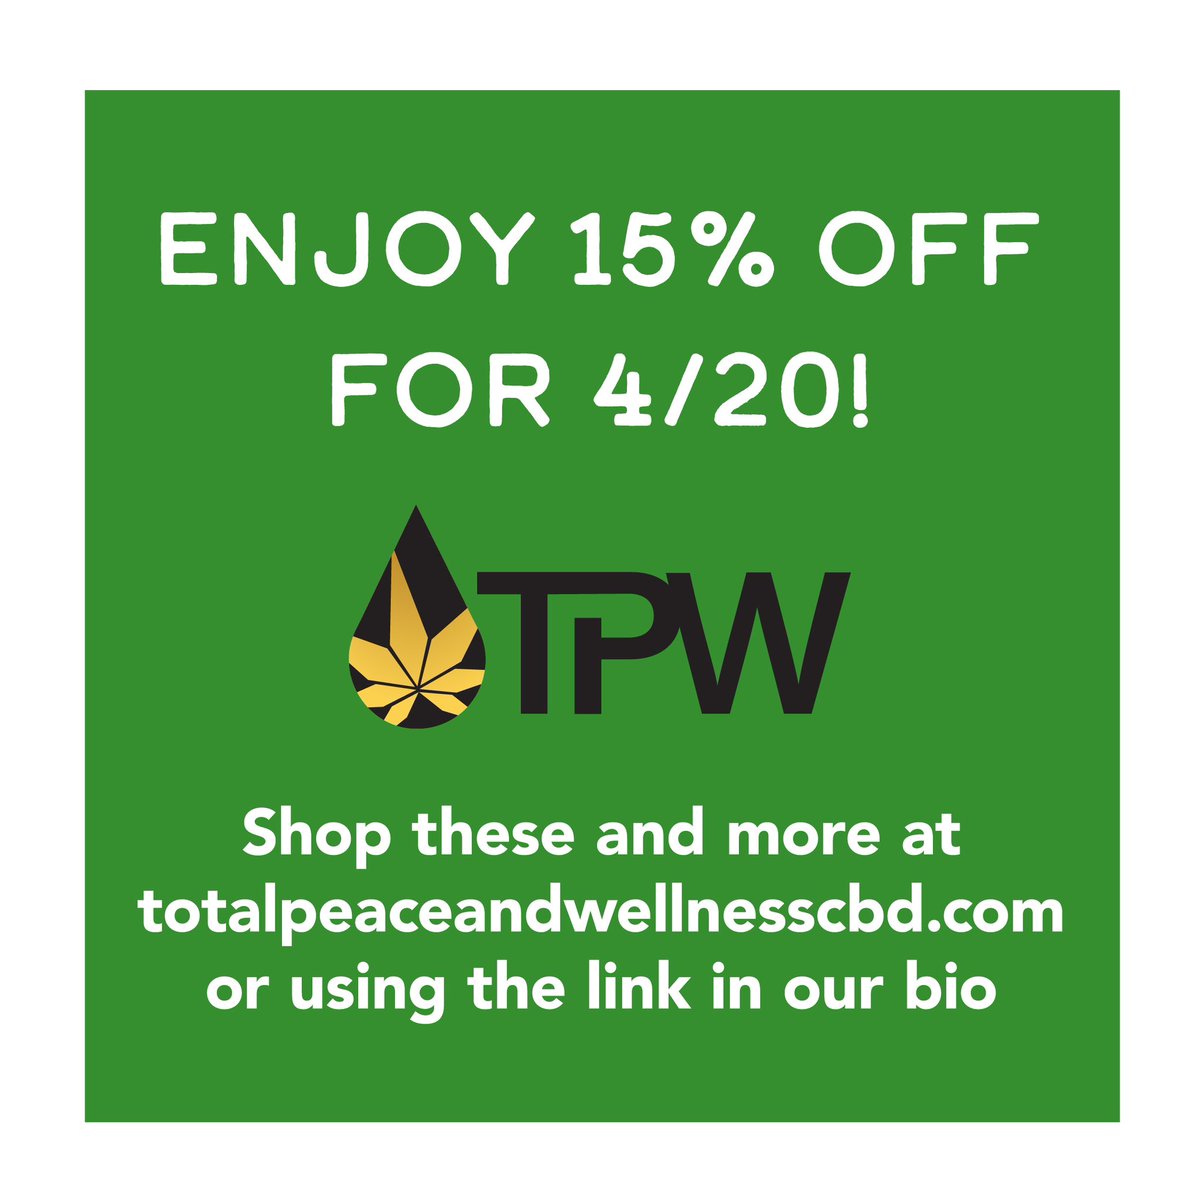 Celebrate 4/20 with Plant Wellness 🎉If you live in Pittsburgh, stop by the retail store for homemade fresh D8 Brownies  and enjoy our sale of 15% off in store and online. No Code Needed🎉🎉

🌱Open today 11a-6pm

#420day #cbdstore #cbdstorenearme #blackowned #shopsmallpgh